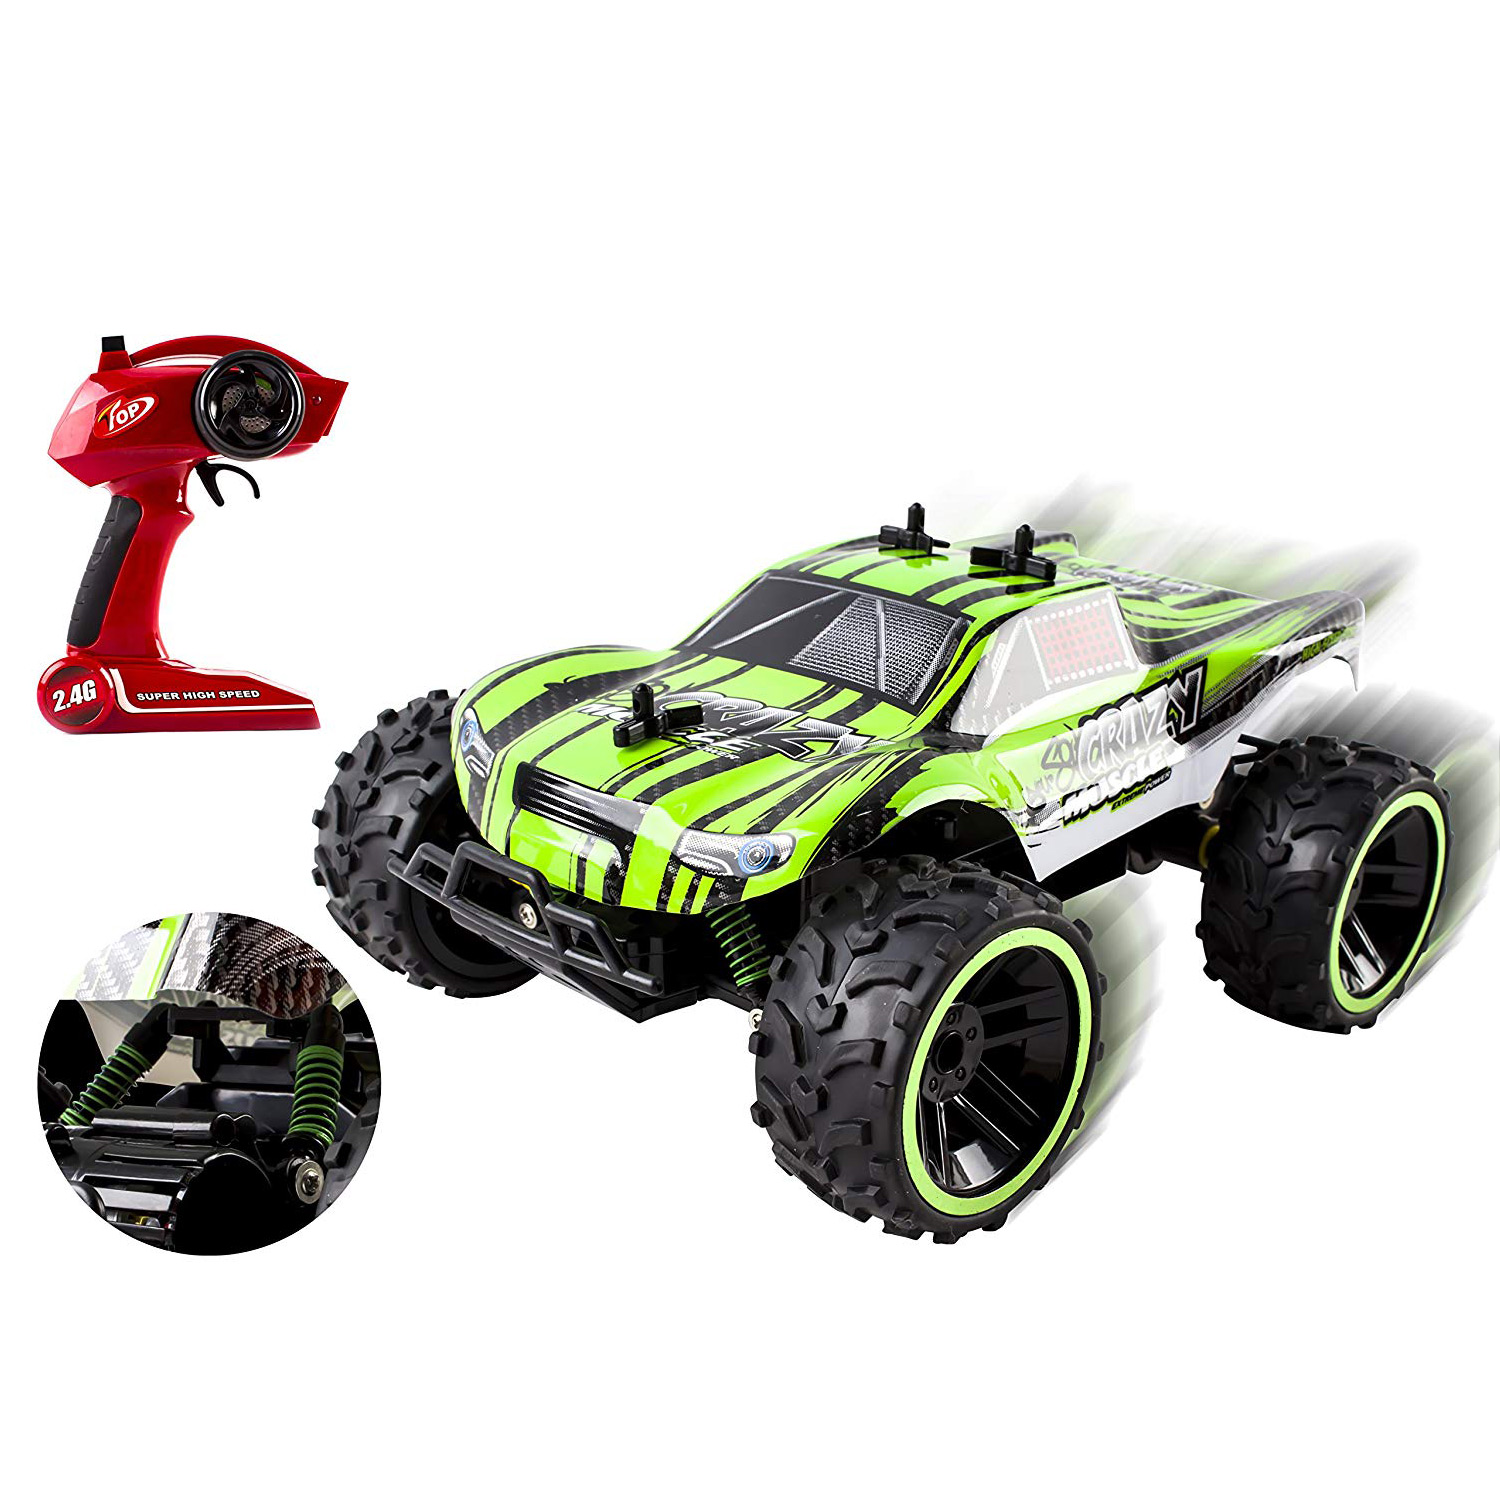 Speed Muscle RC Buggy 24Ghz 116 Scale Remote Control Truggy Ready to Run With Working Suspension And Spring Shock Absorbers for Indoor Outdoor And Off-Road Use Strong Build Toy Green